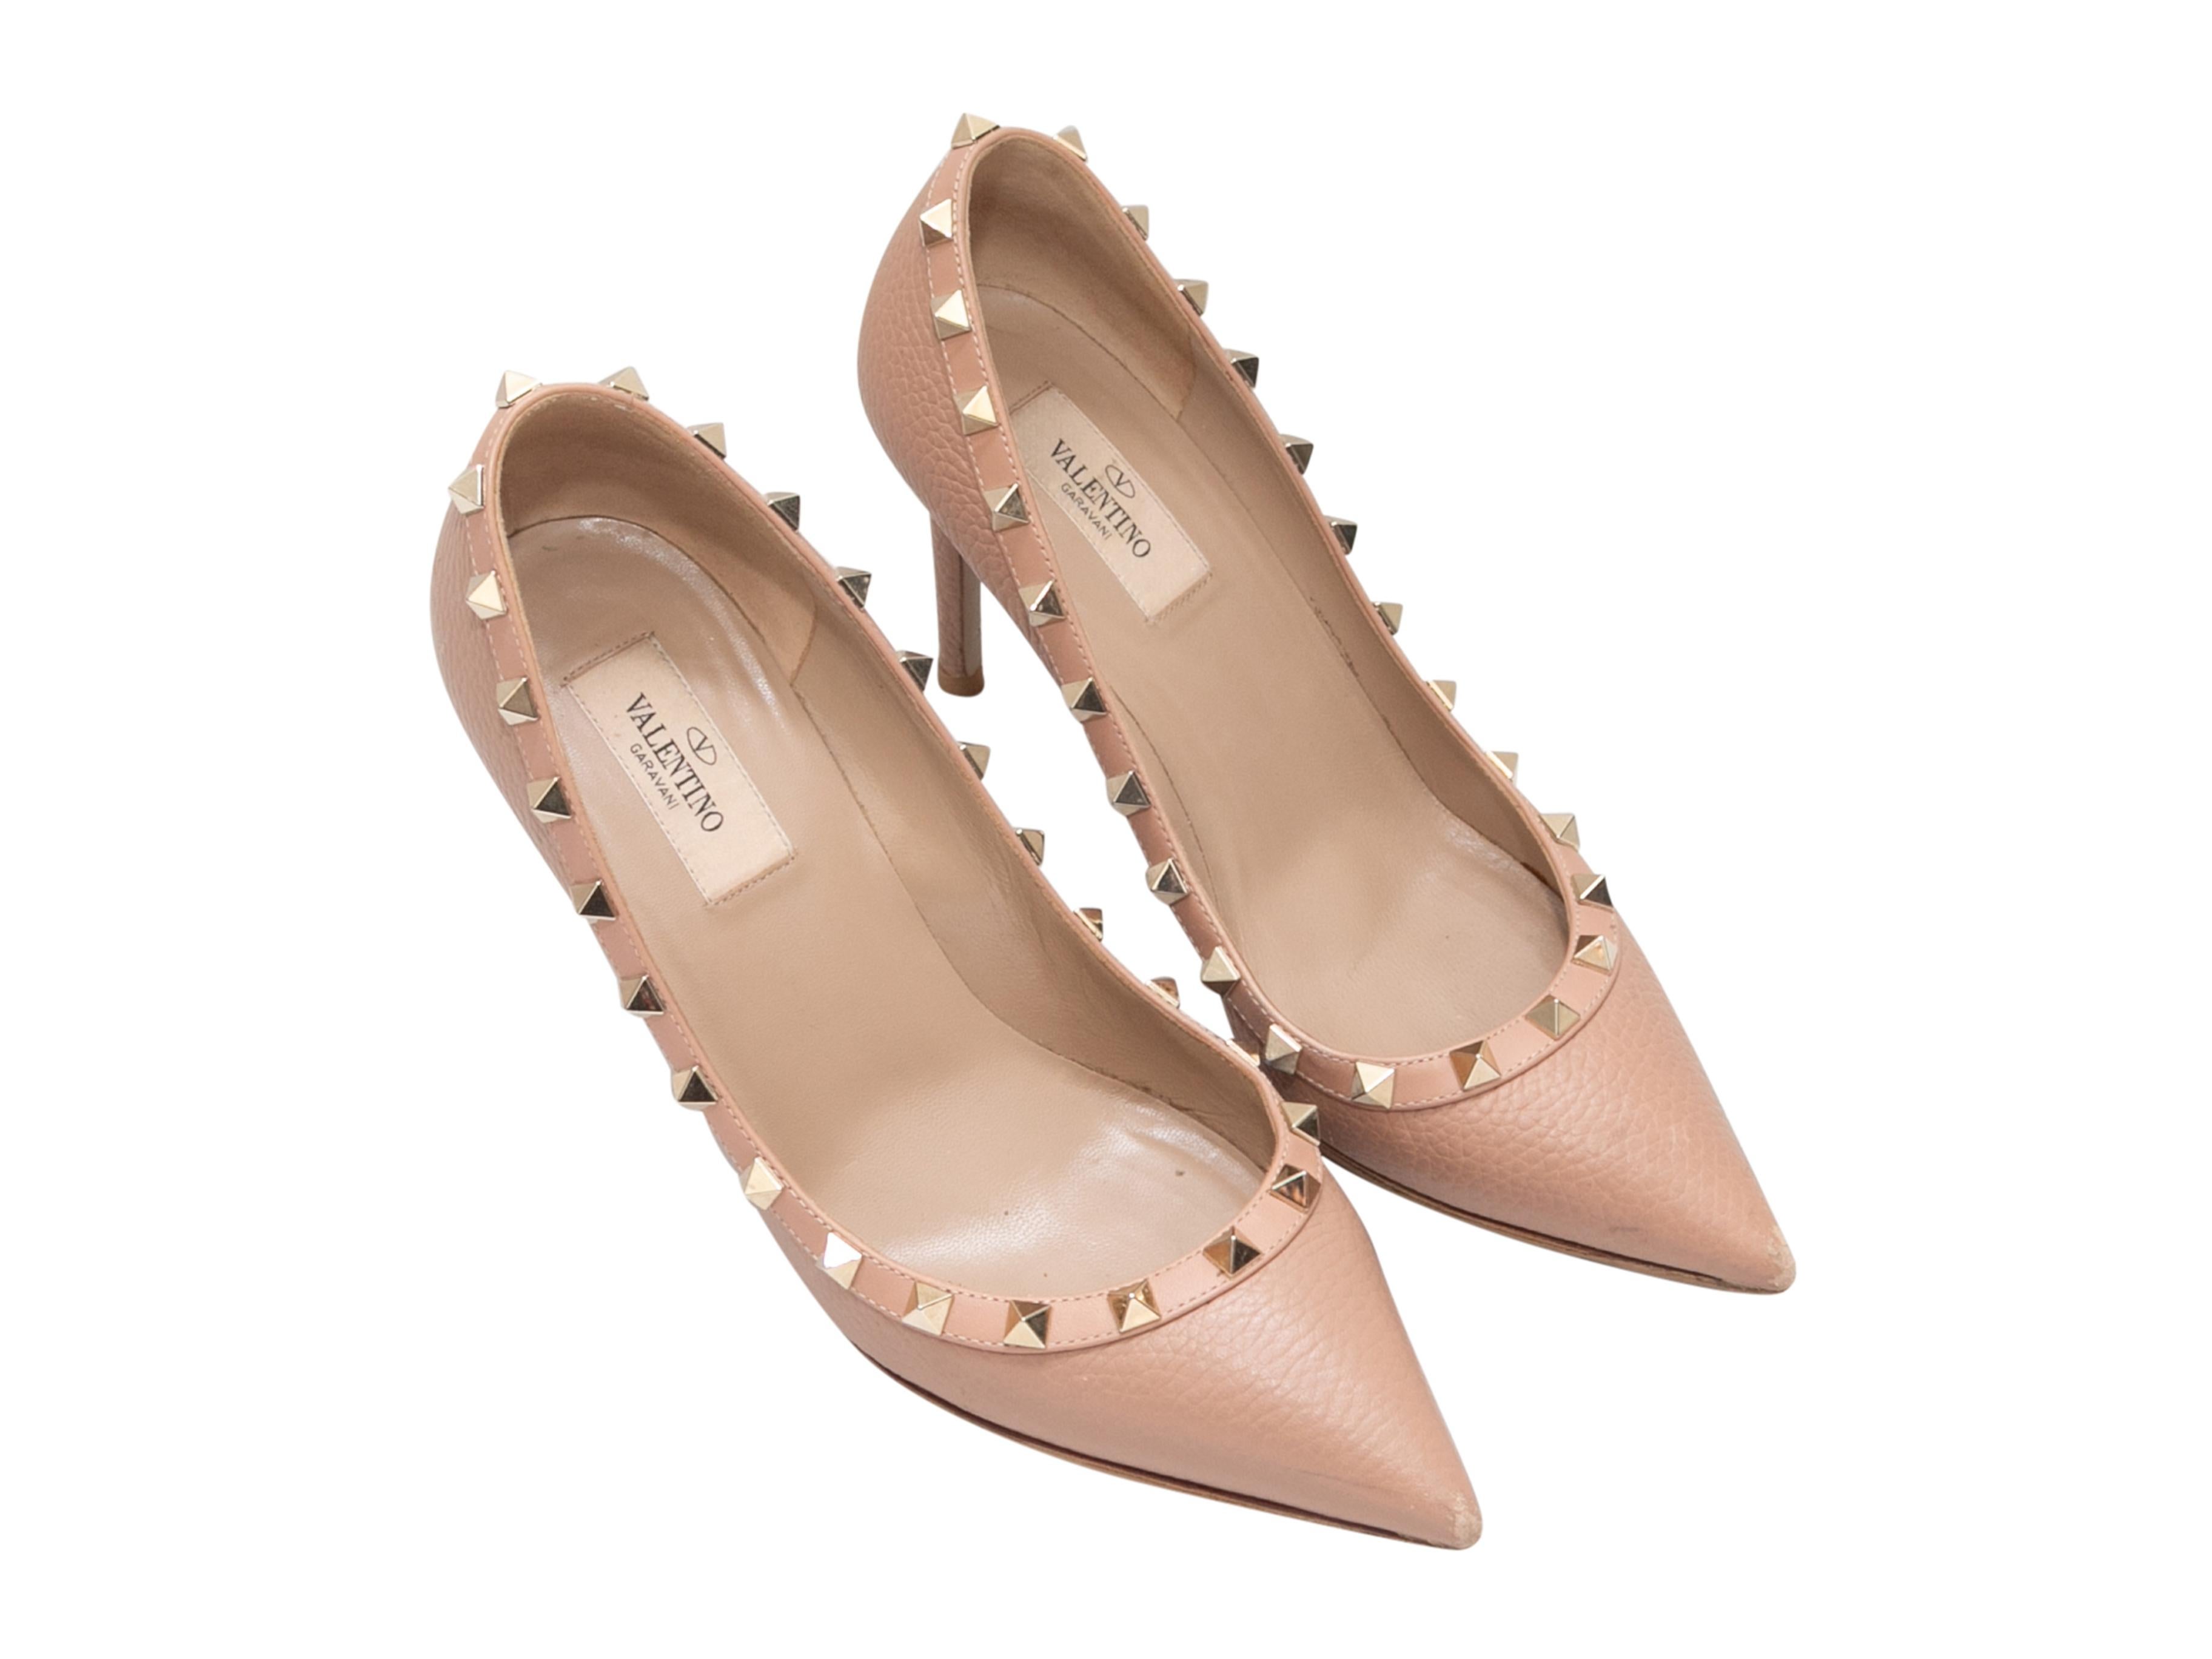 Beige pebbled leather pointed-toe pumps by Valentino. Gold-tone Rockstud trim at tops. 3.5